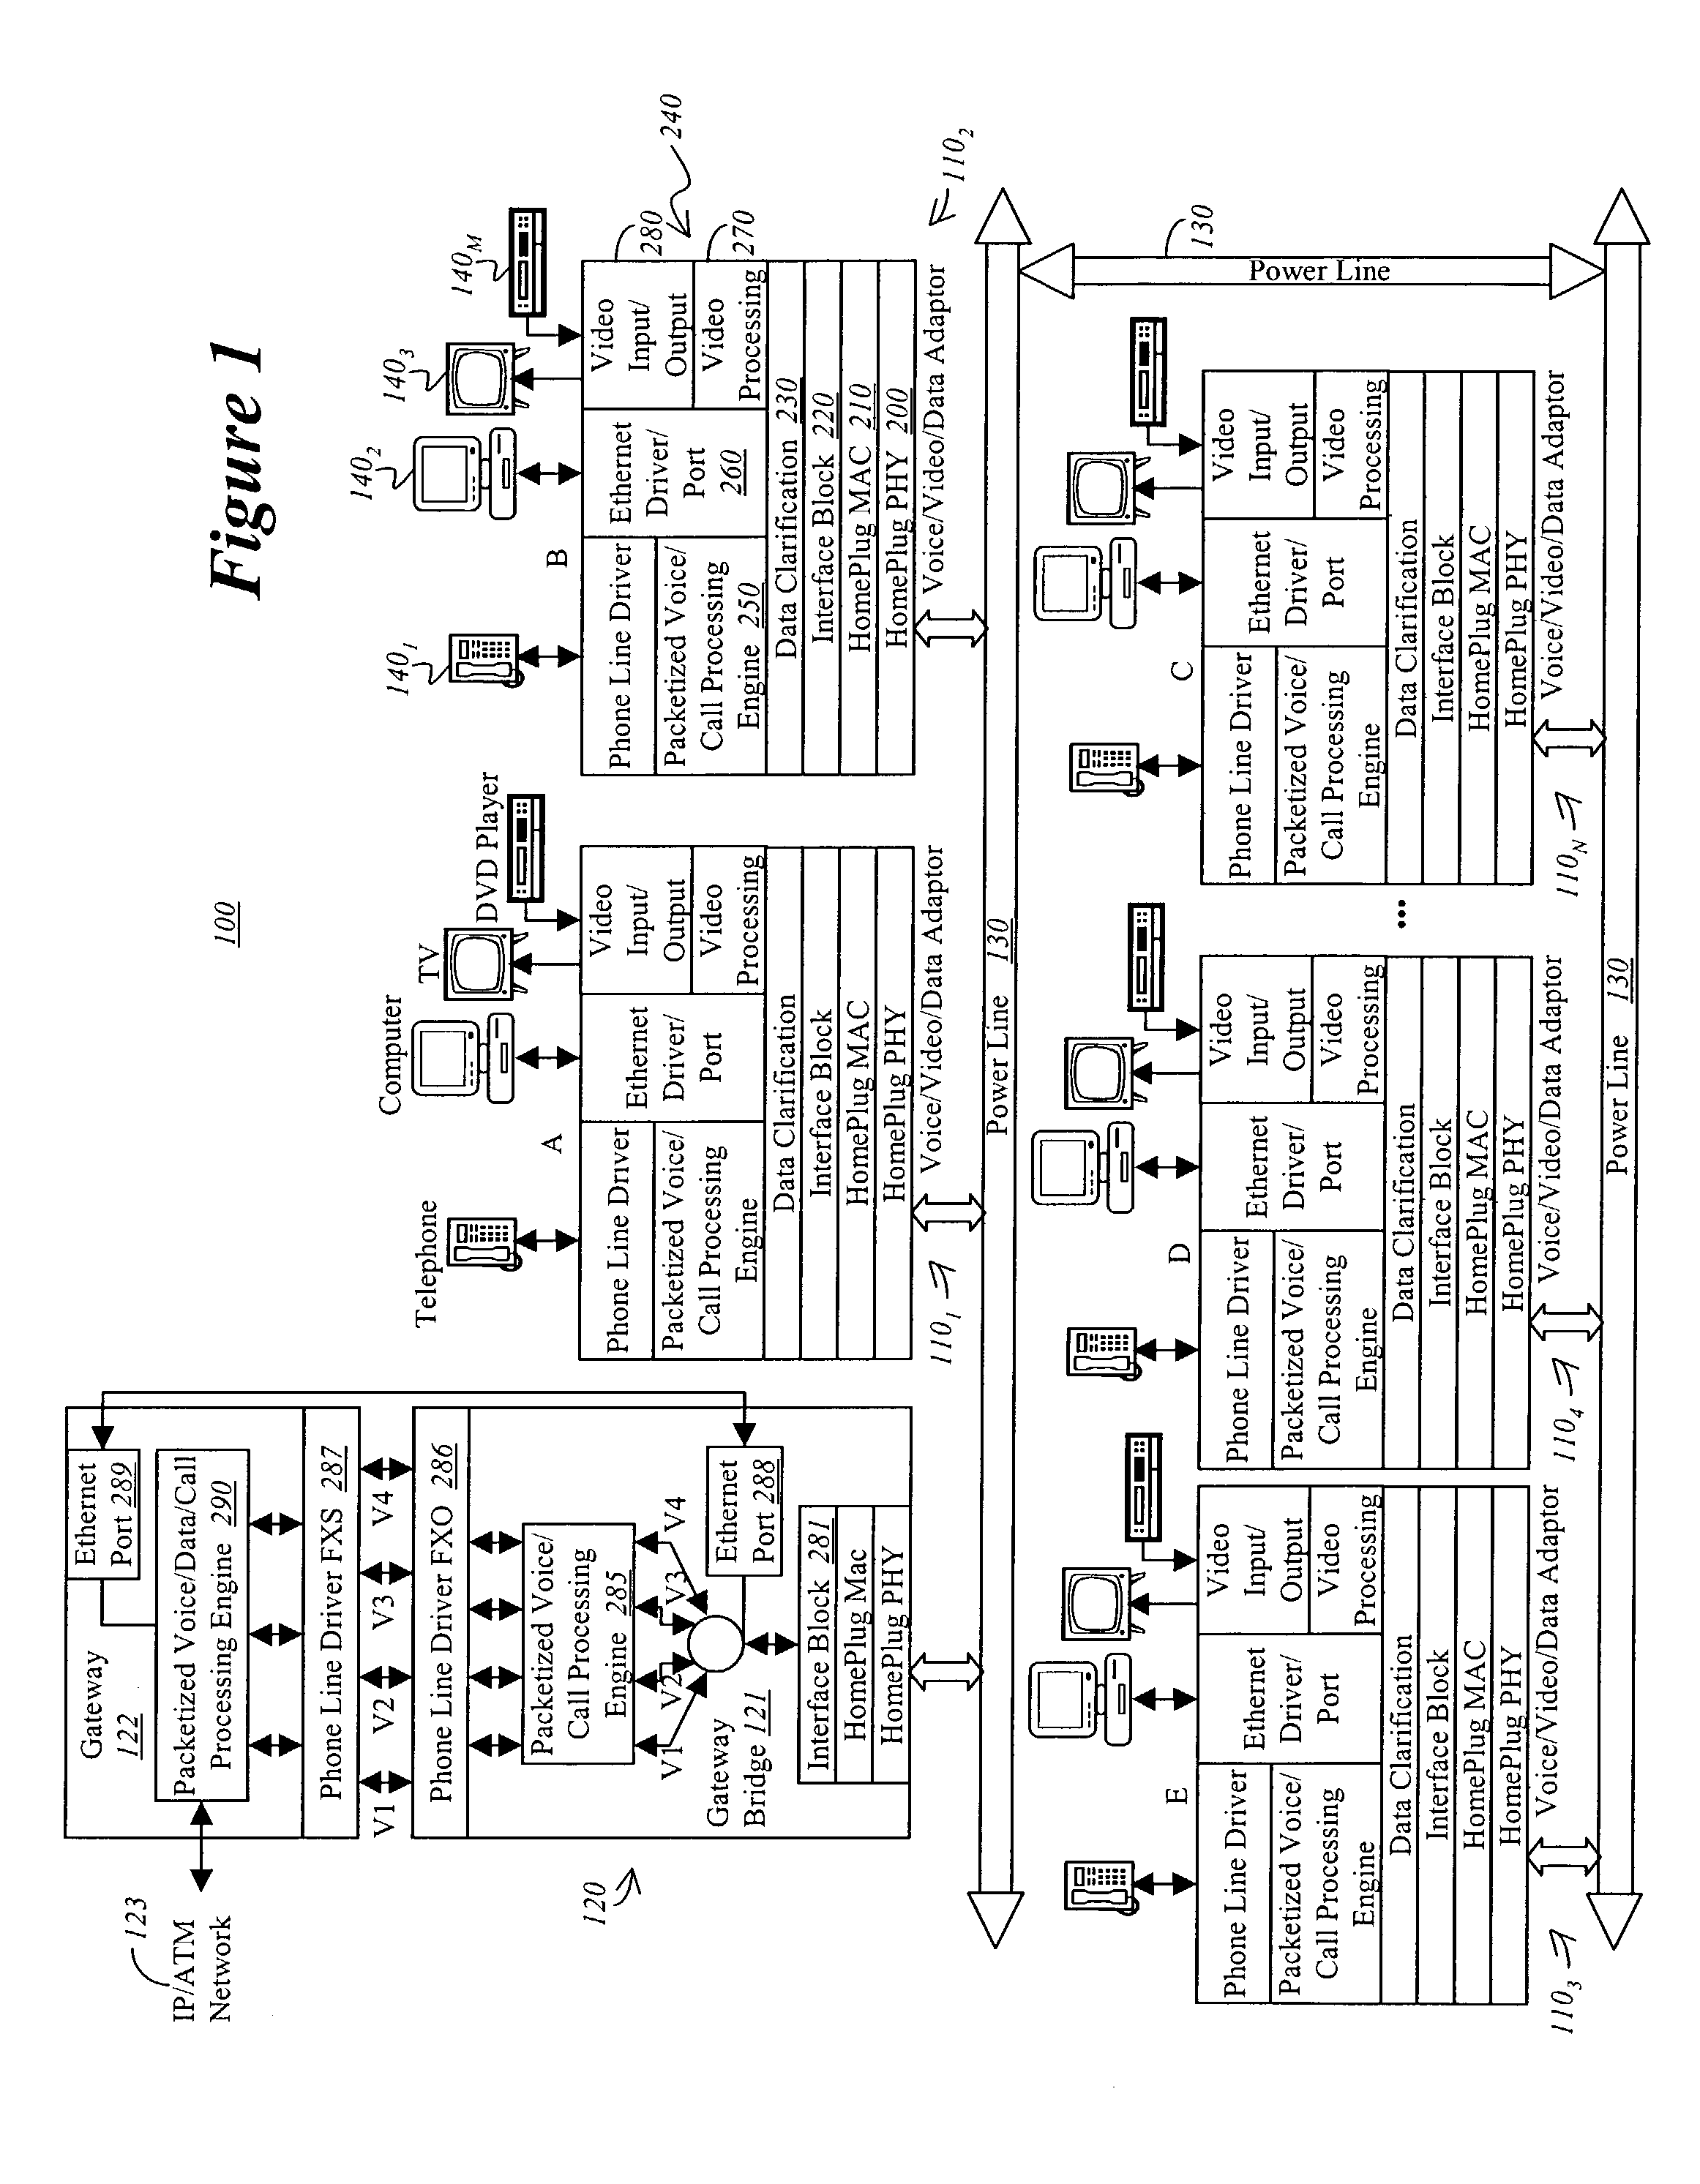 System and method for simultaneously transporting different types of information over a power line